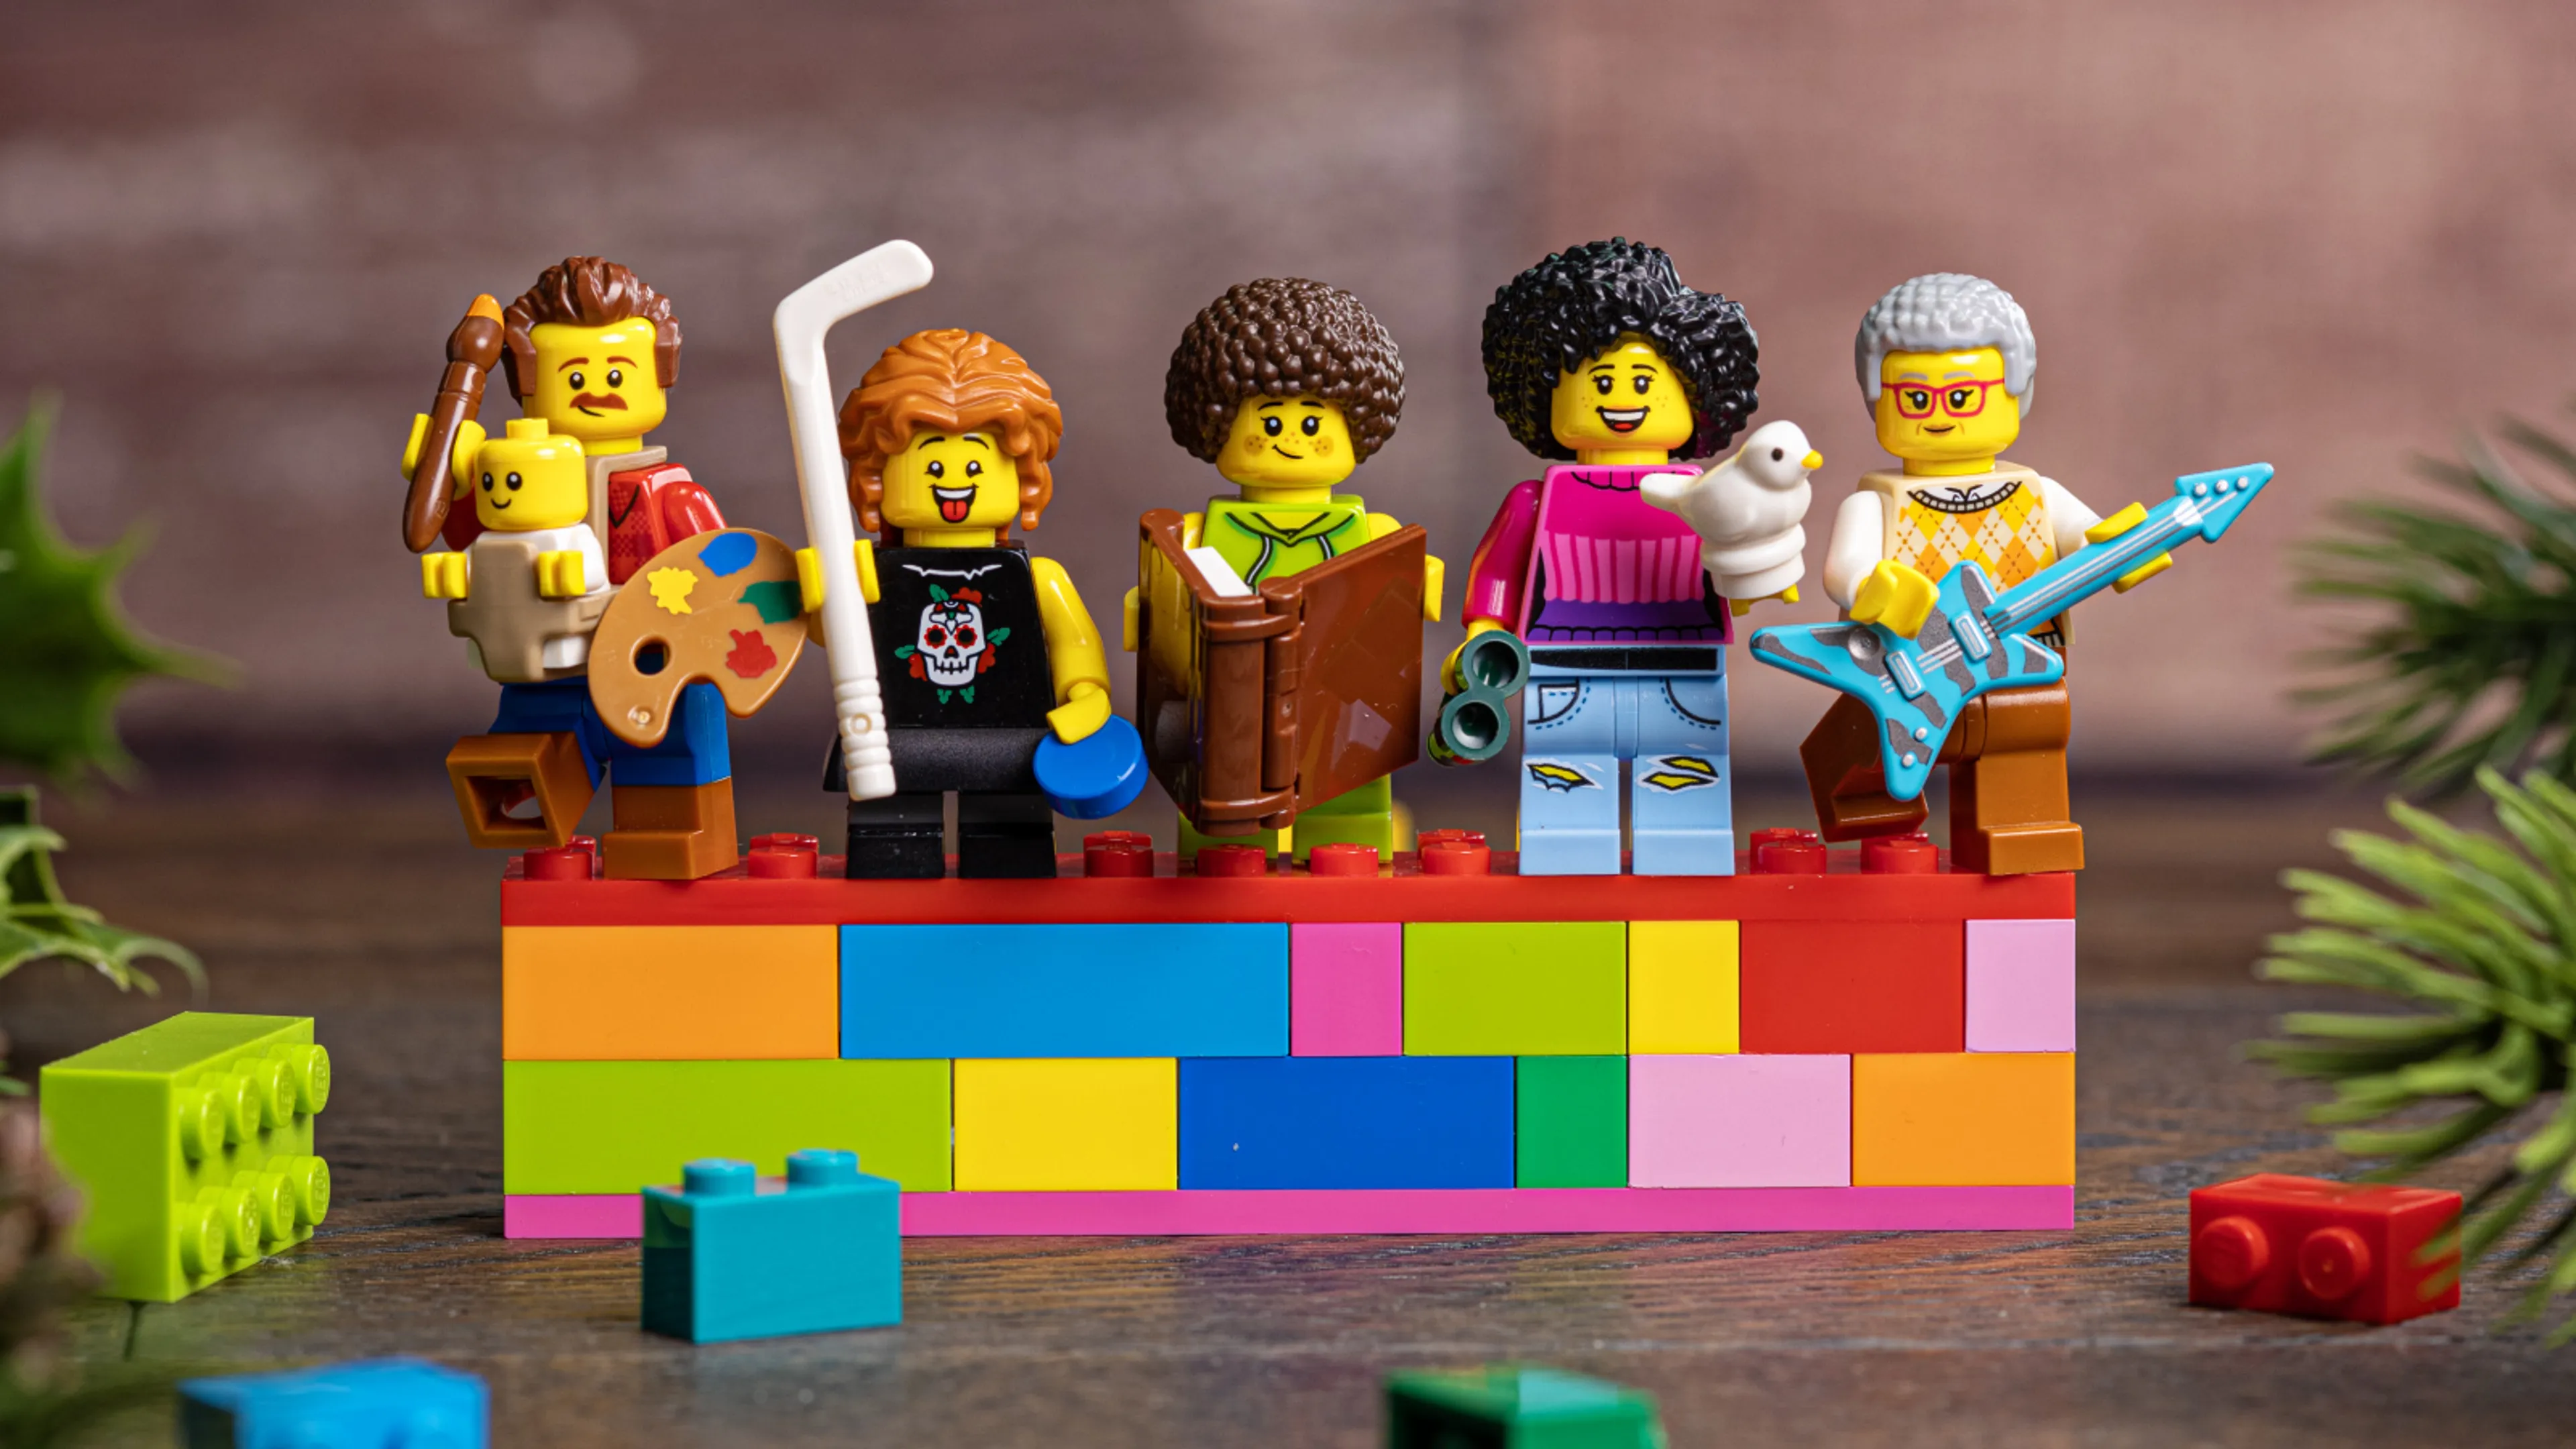 LEGO minifigures on a stage